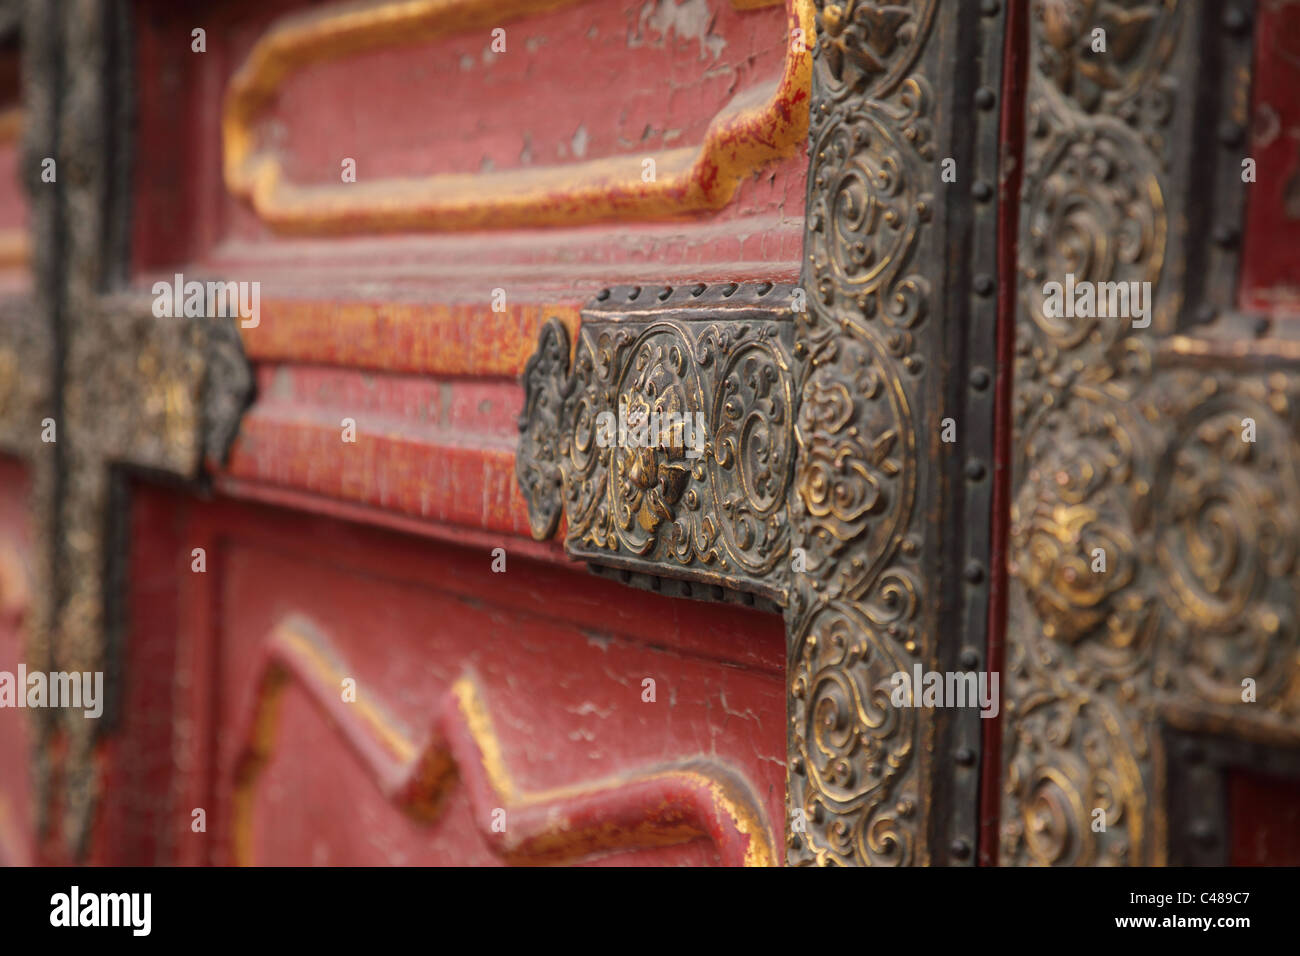 Architectural detail, Forbidden City, Beijing, China Stock Photo